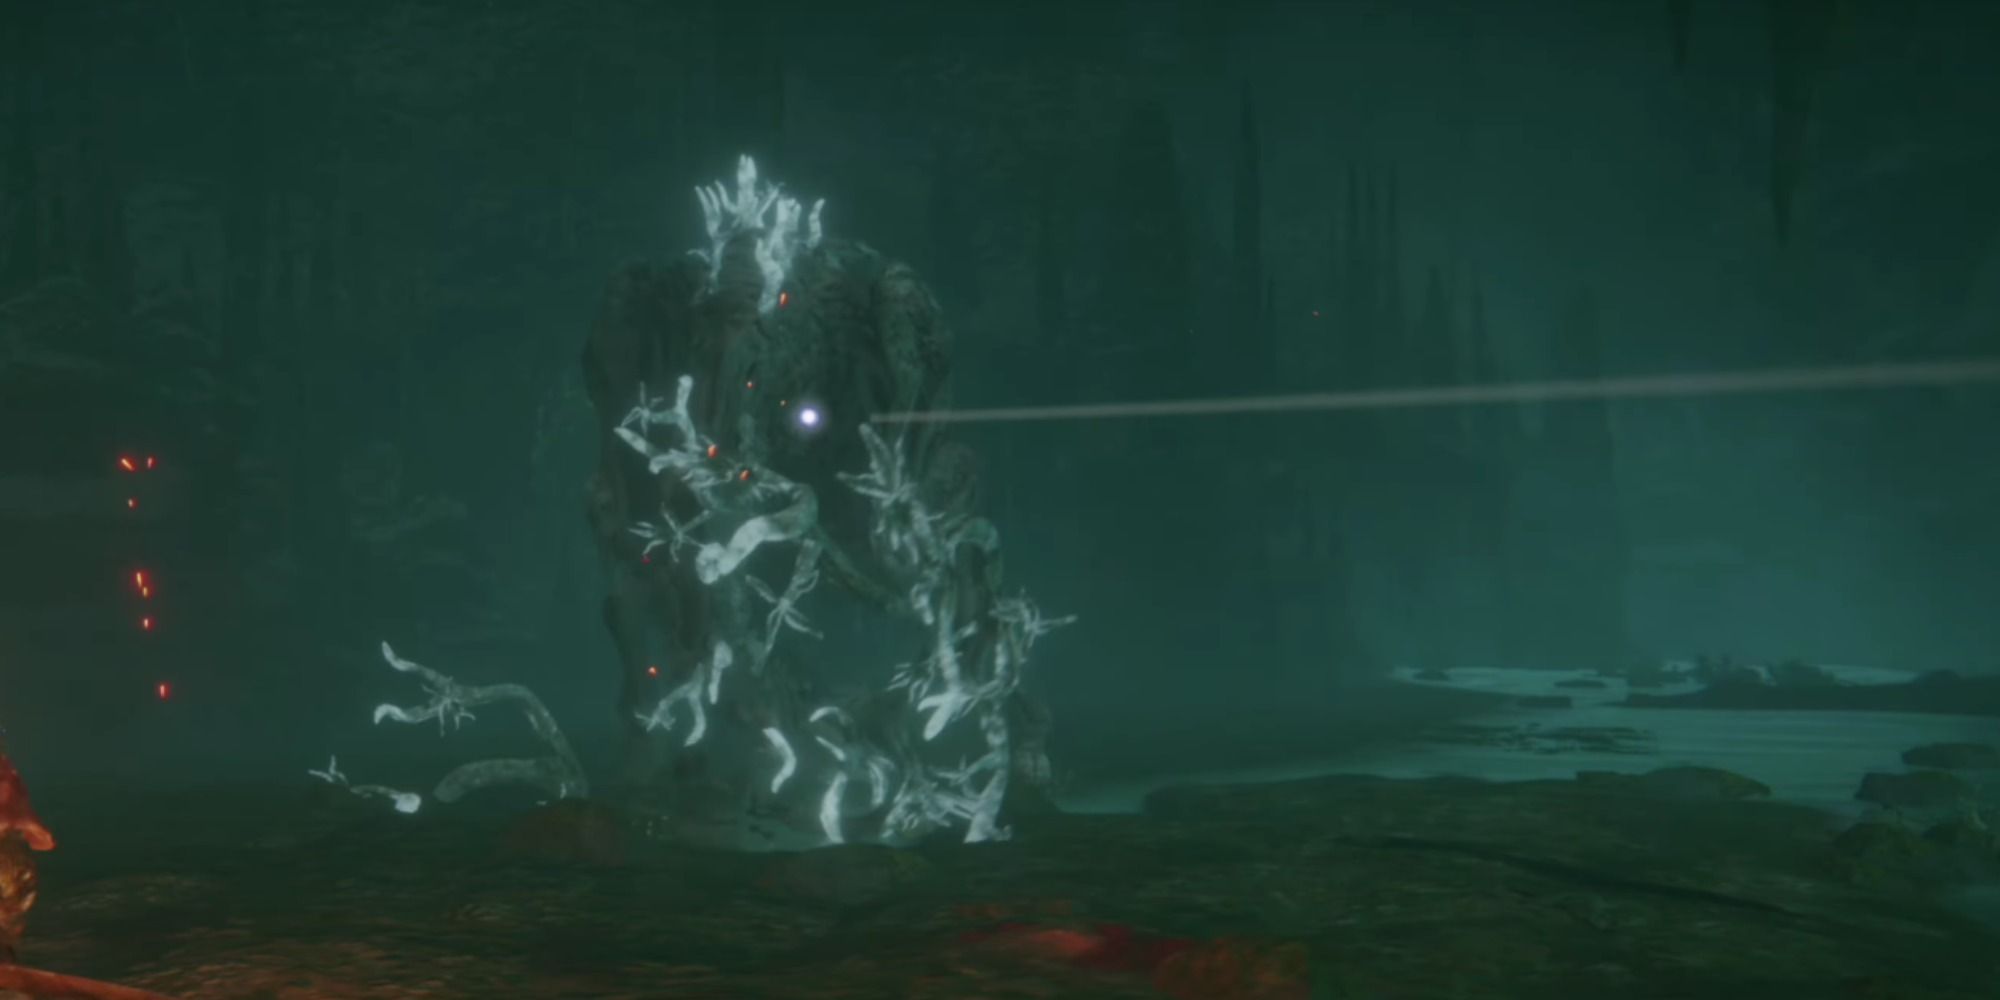 The Ancestor Spirit getting ready to charge forward in Elden Ring